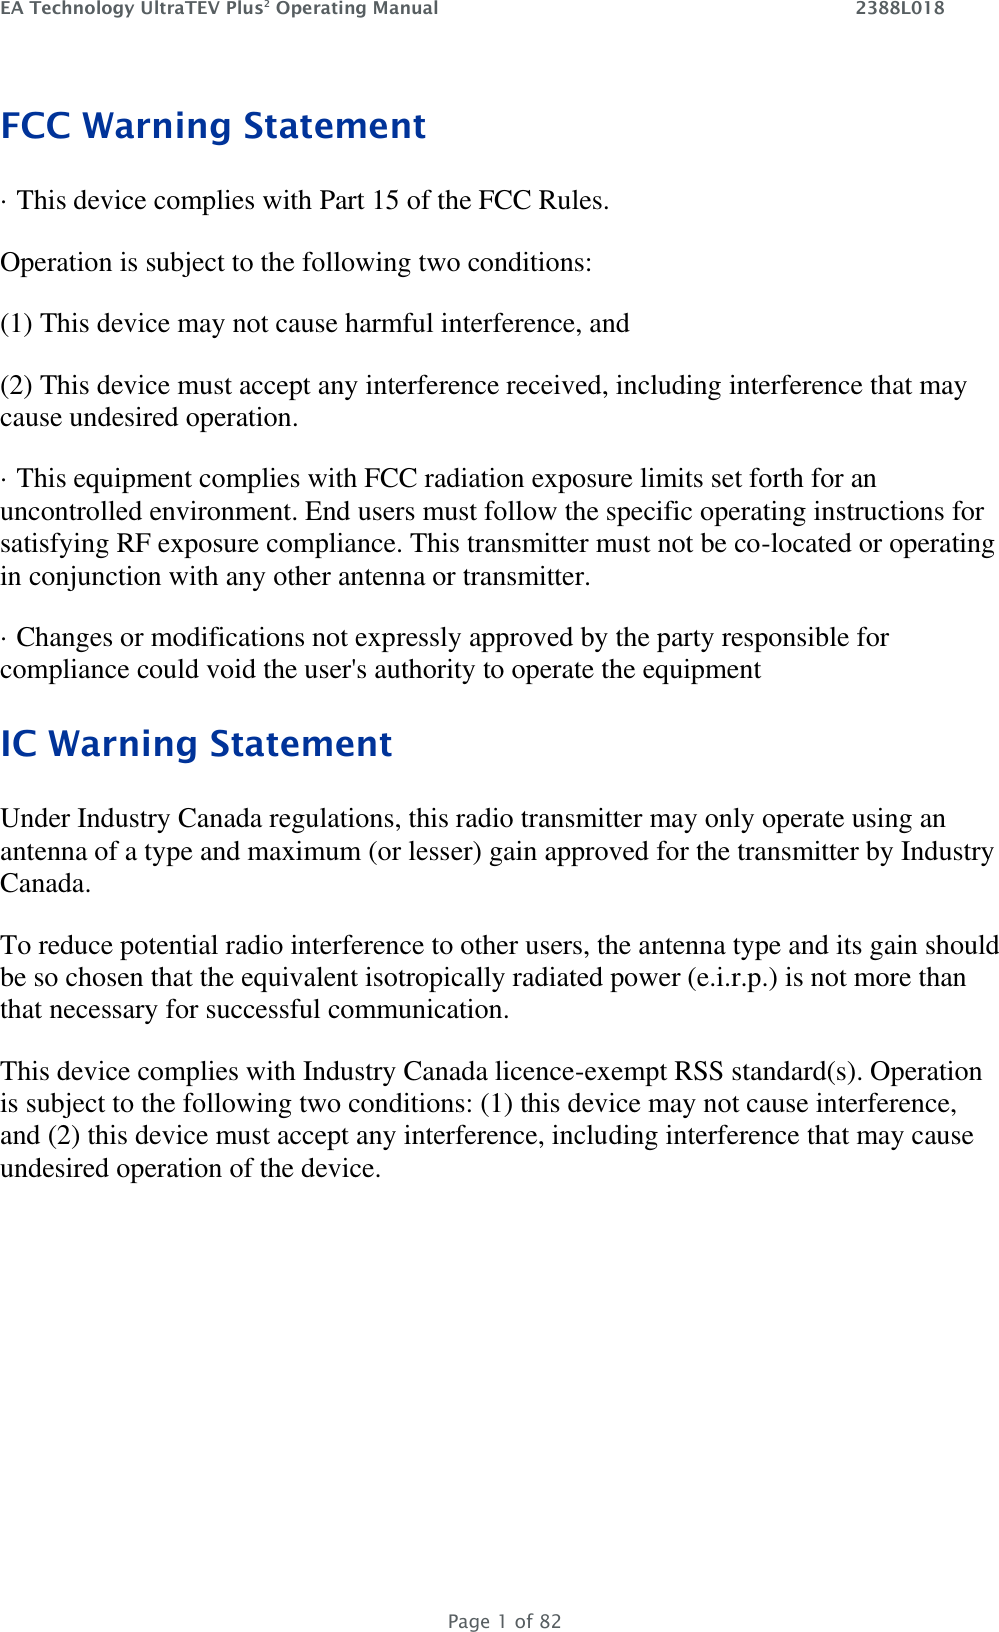 EA Technology UltraTEV Plus2 Operating Manual    2388L018   Page 1 of 82 FCC Warning Statement · This device complies with Part 15 of the FCC Rules. Operation is subject to the following two conditions: (1) This device may not cause harmful interference, and (2) This device must accept any interference received, including interference that may cause undesired operation. · This equipment complies with FCC radiation exposure limits set forth for an uncontrolled environment. End users must follow the specific operating instructions for satisfying RF exposure compliance. This transmitter must not be co-located or operating in conjunction with any other antenna or transmitter. · Changes or modifications not expressly approved by the party responsible for compliance could void the user&apos;s authority to operate the equipment IC Warning Statement Under Industry Canada regulations, this radio transmitter may only operate using an antenna of a type and maximum (or lesser) gain approved for the transmitter by Industry Canada. To reduce potential radio interference to other users, the antenna type and its gain should be so chosen that the equivalent isotropically radiated power (e.i.r.p.) is not more than that necessary for successful communication. This device complies with Industry Canada licence-exempt RSS standard(s). Operation is subject to the following two conditions: (1) this device may not cause interference, and (2) this device must accept any interference, including interference that may cause undesired operation of the device.   